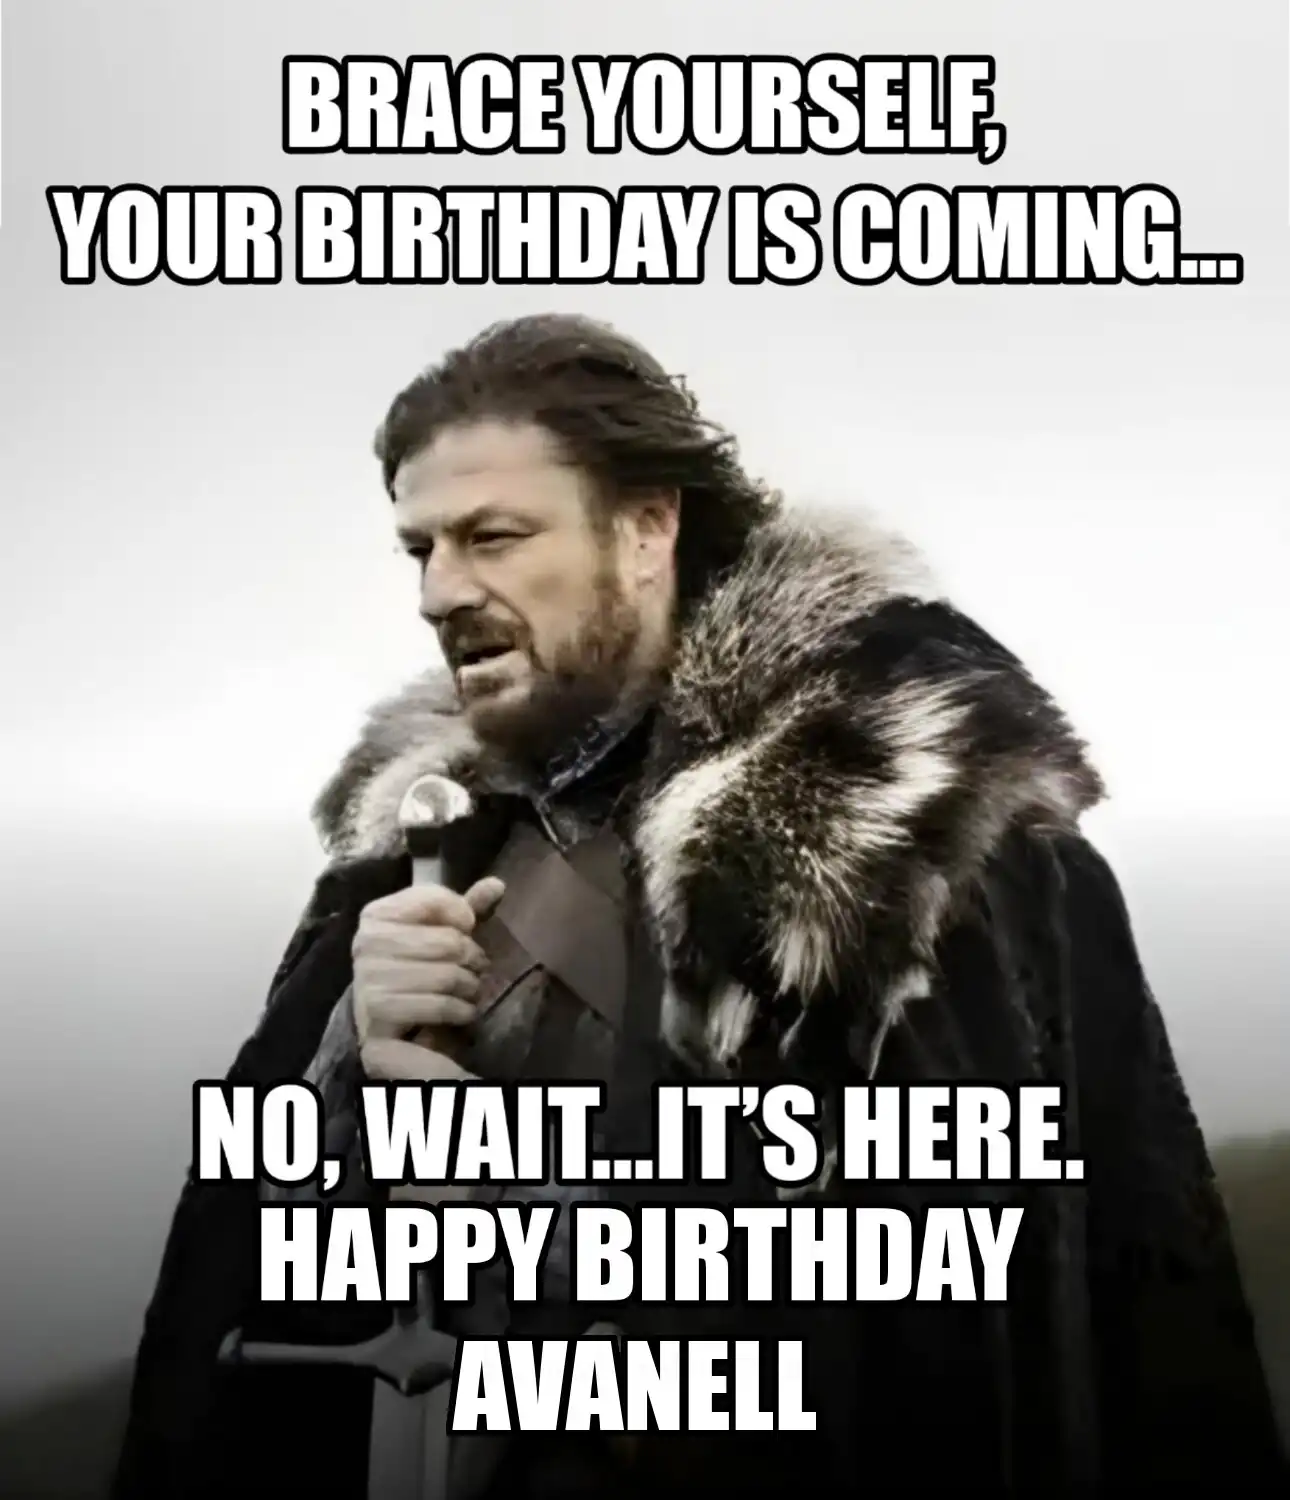 Happy Birthday Avanell Brace Yourself Your Birthday Is Coming Meme